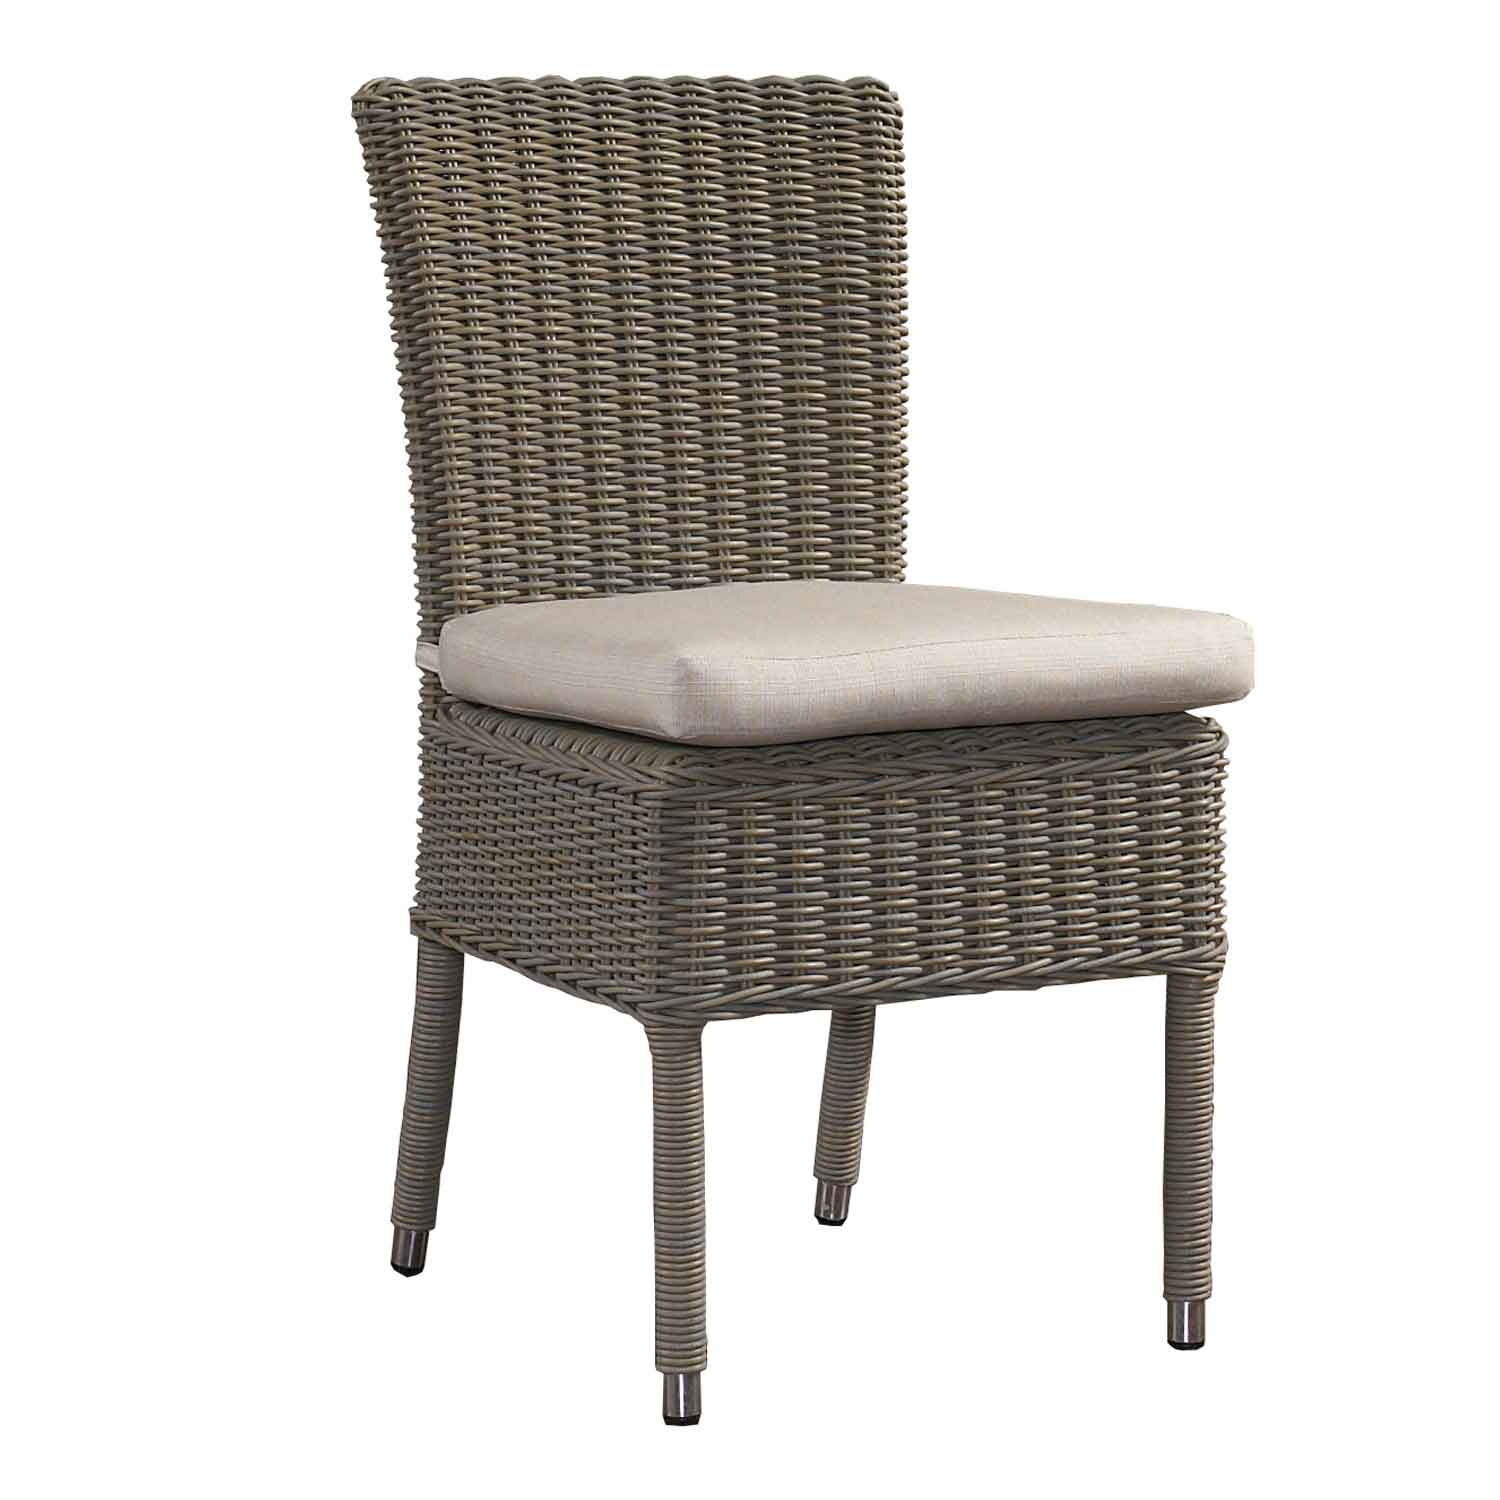 Boca Outdoor Dining Chair Padma's Plantation Lifestyle 1